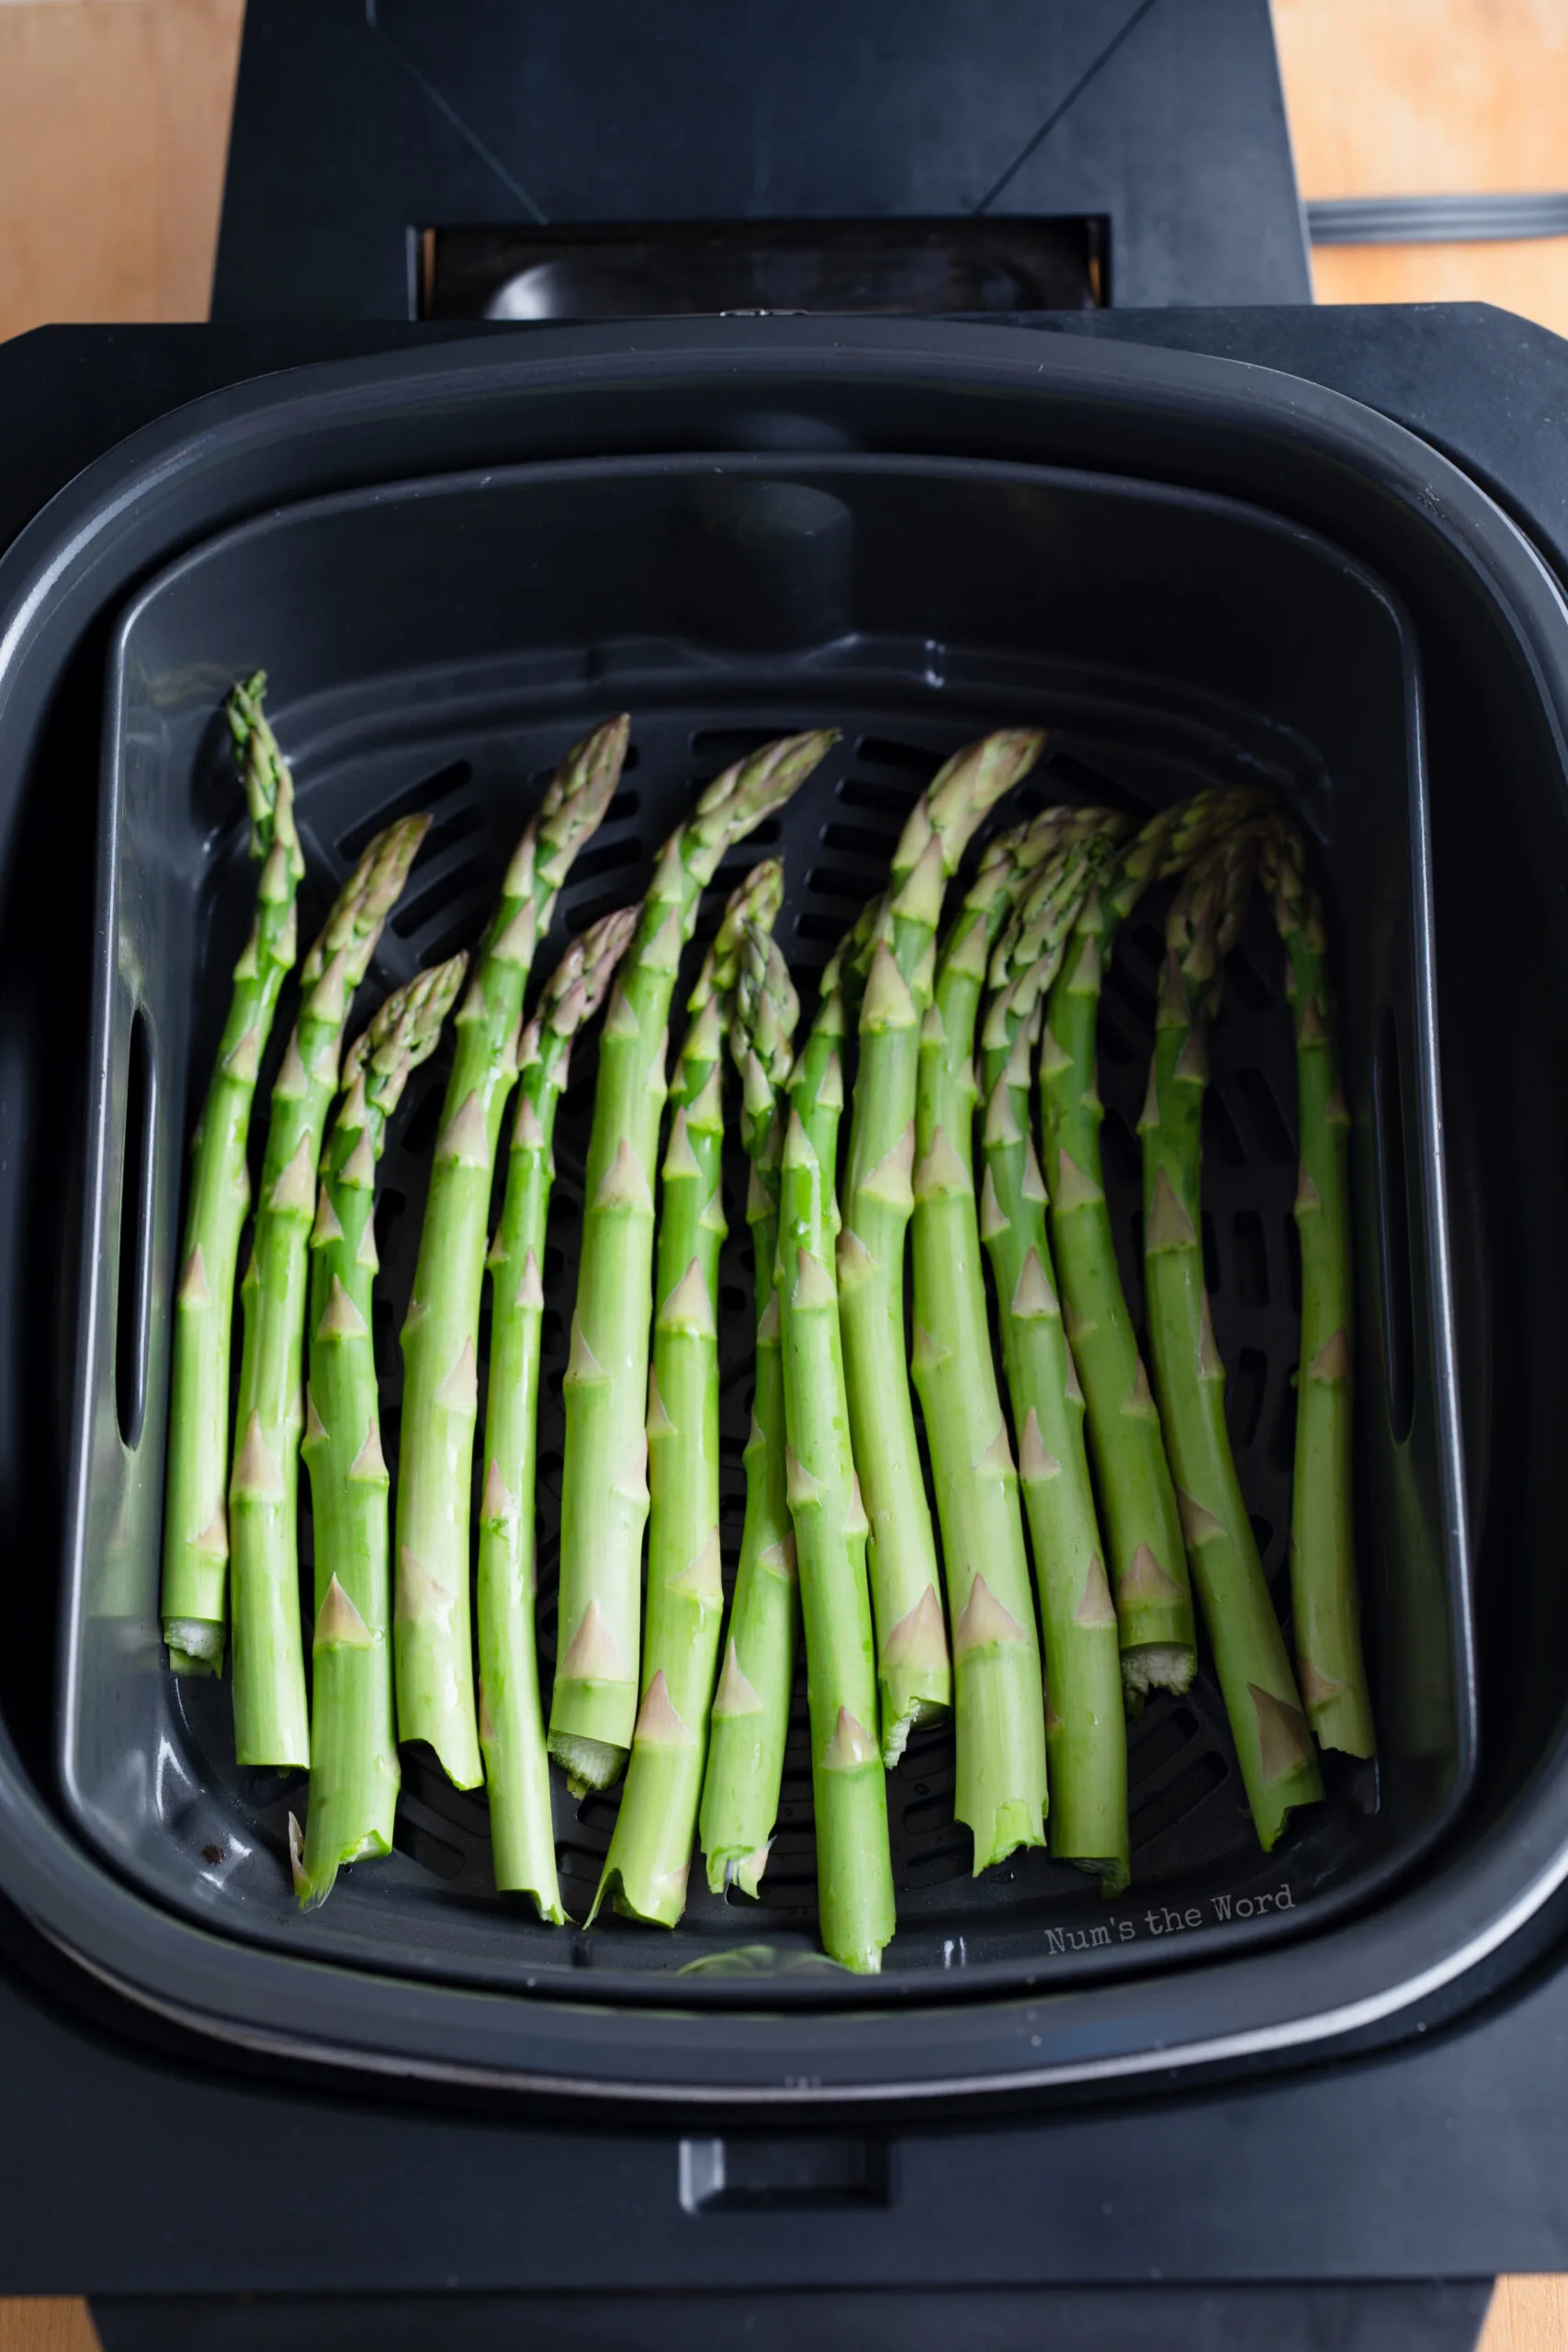 Asparagus in air fryer, uncooked.